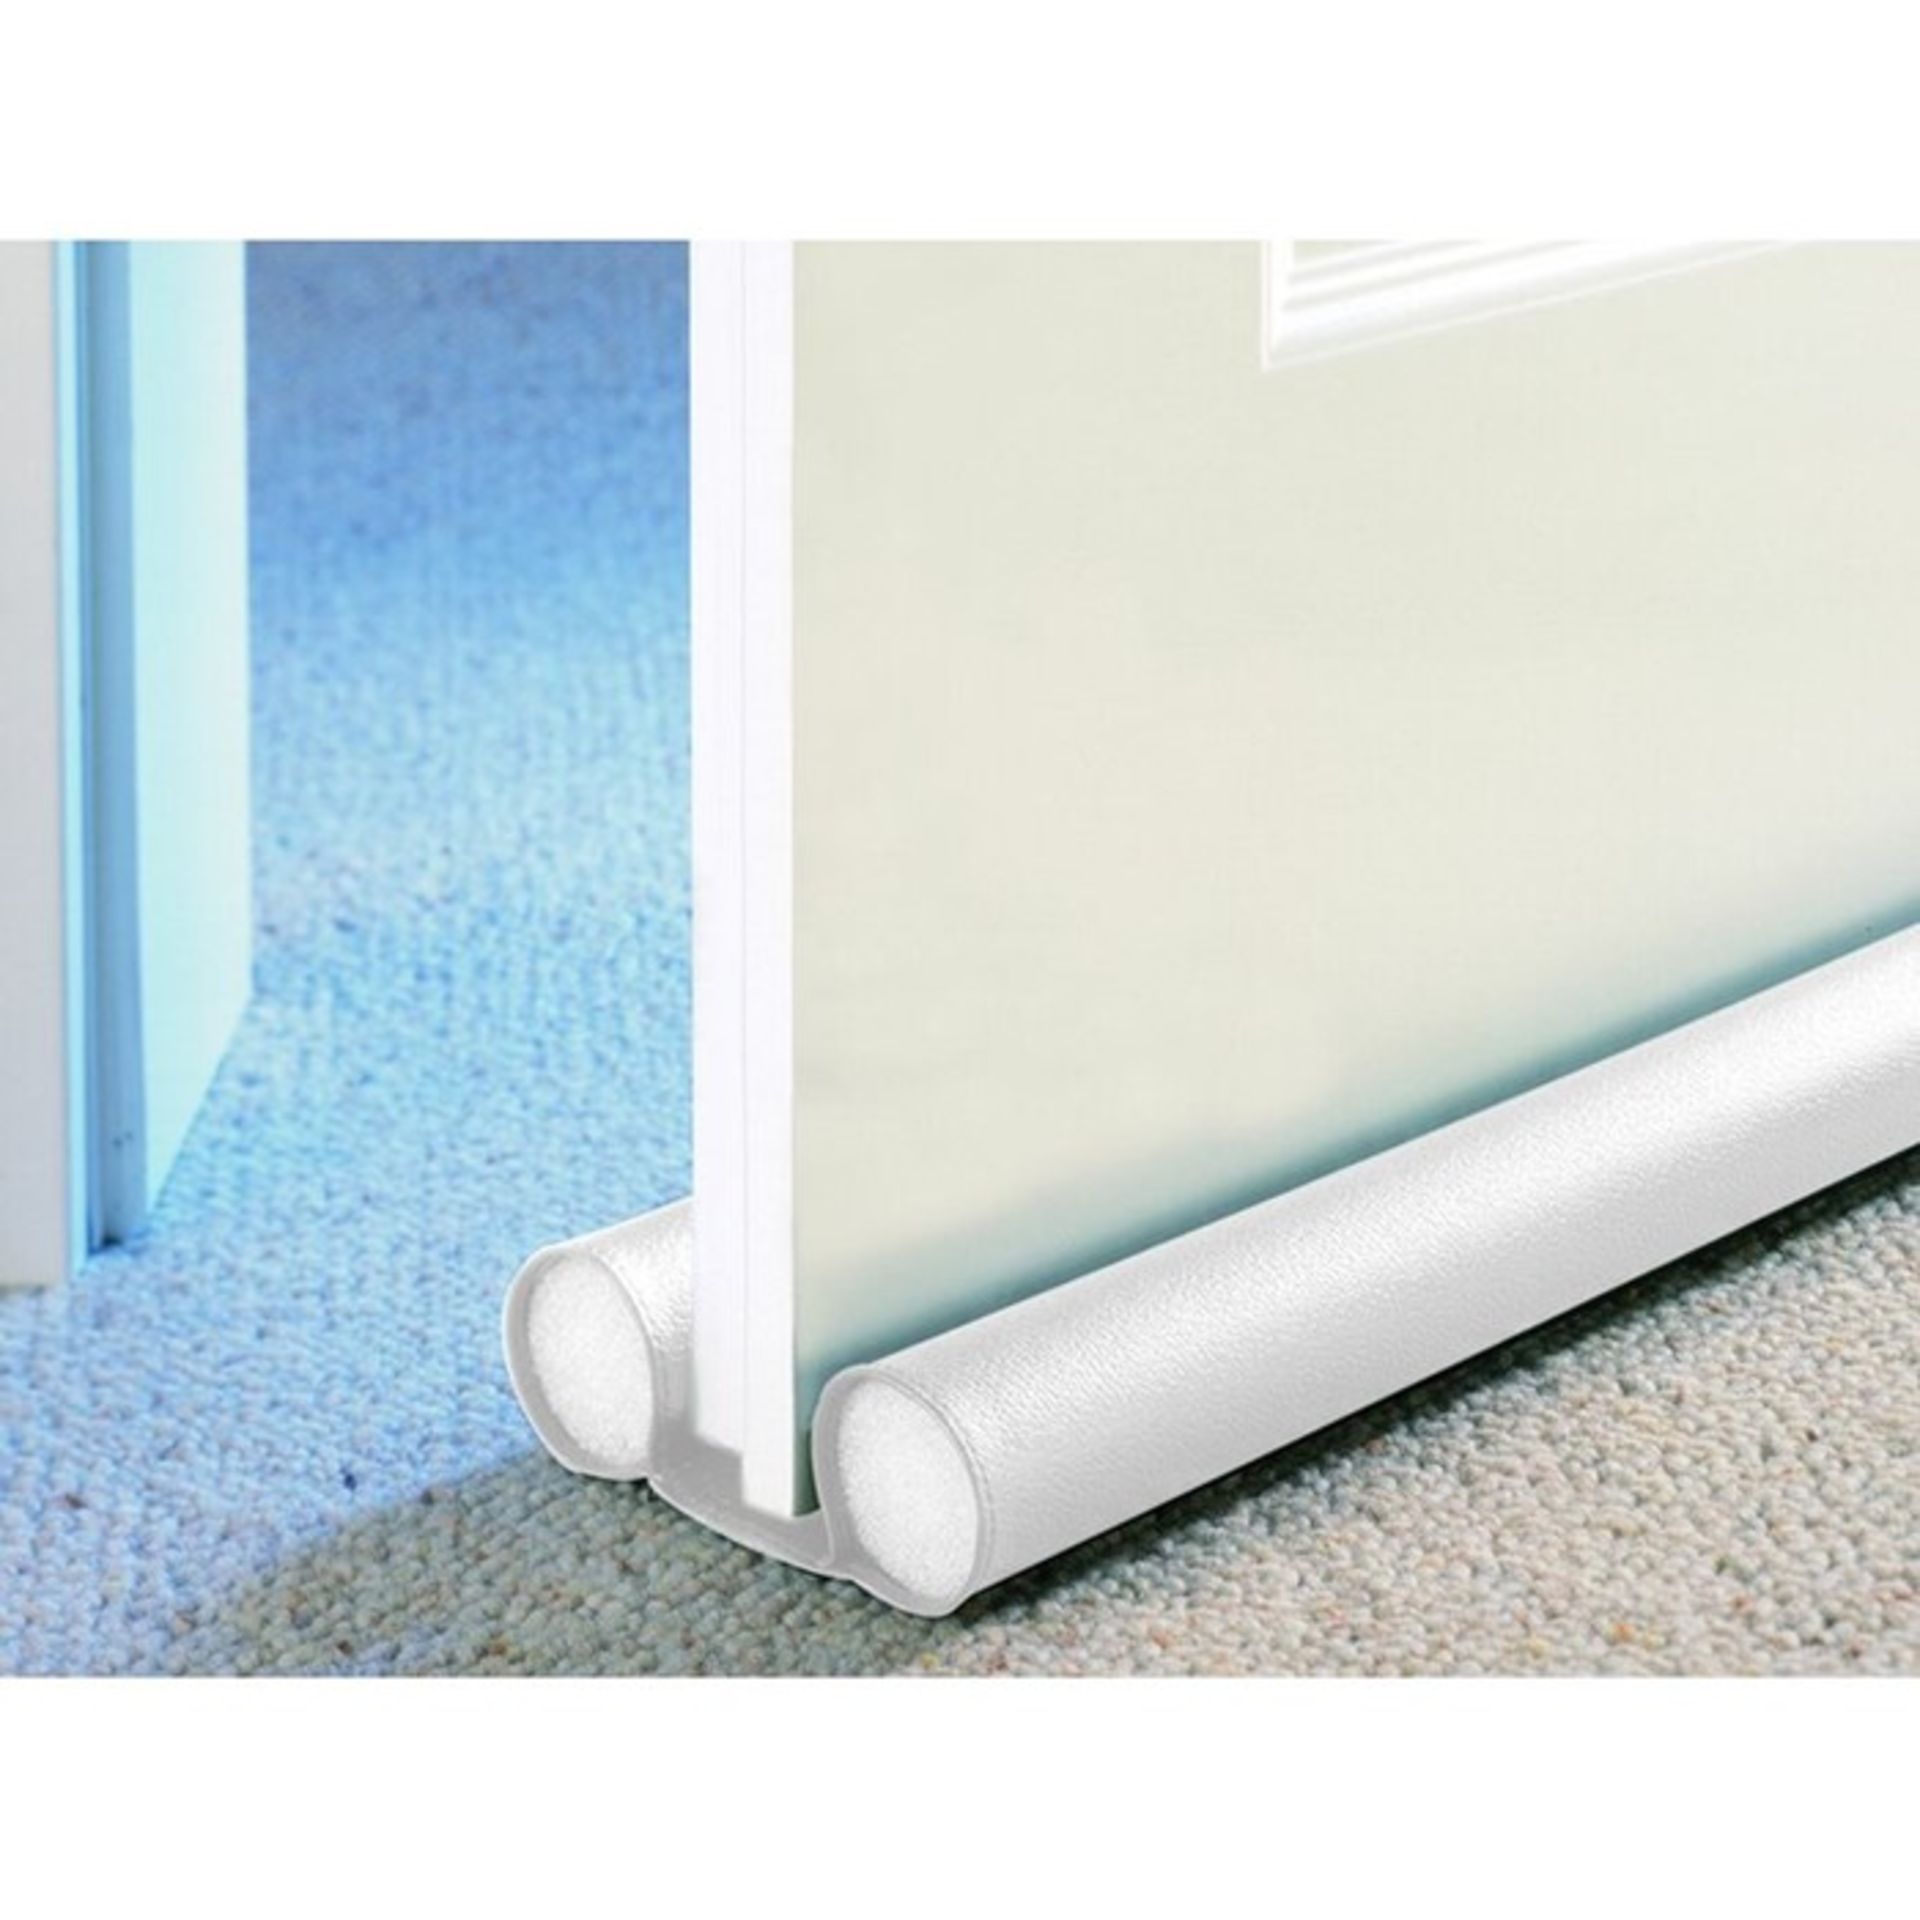 Wenko Plastic Draught Excluder (Set of 2) - RRP £2